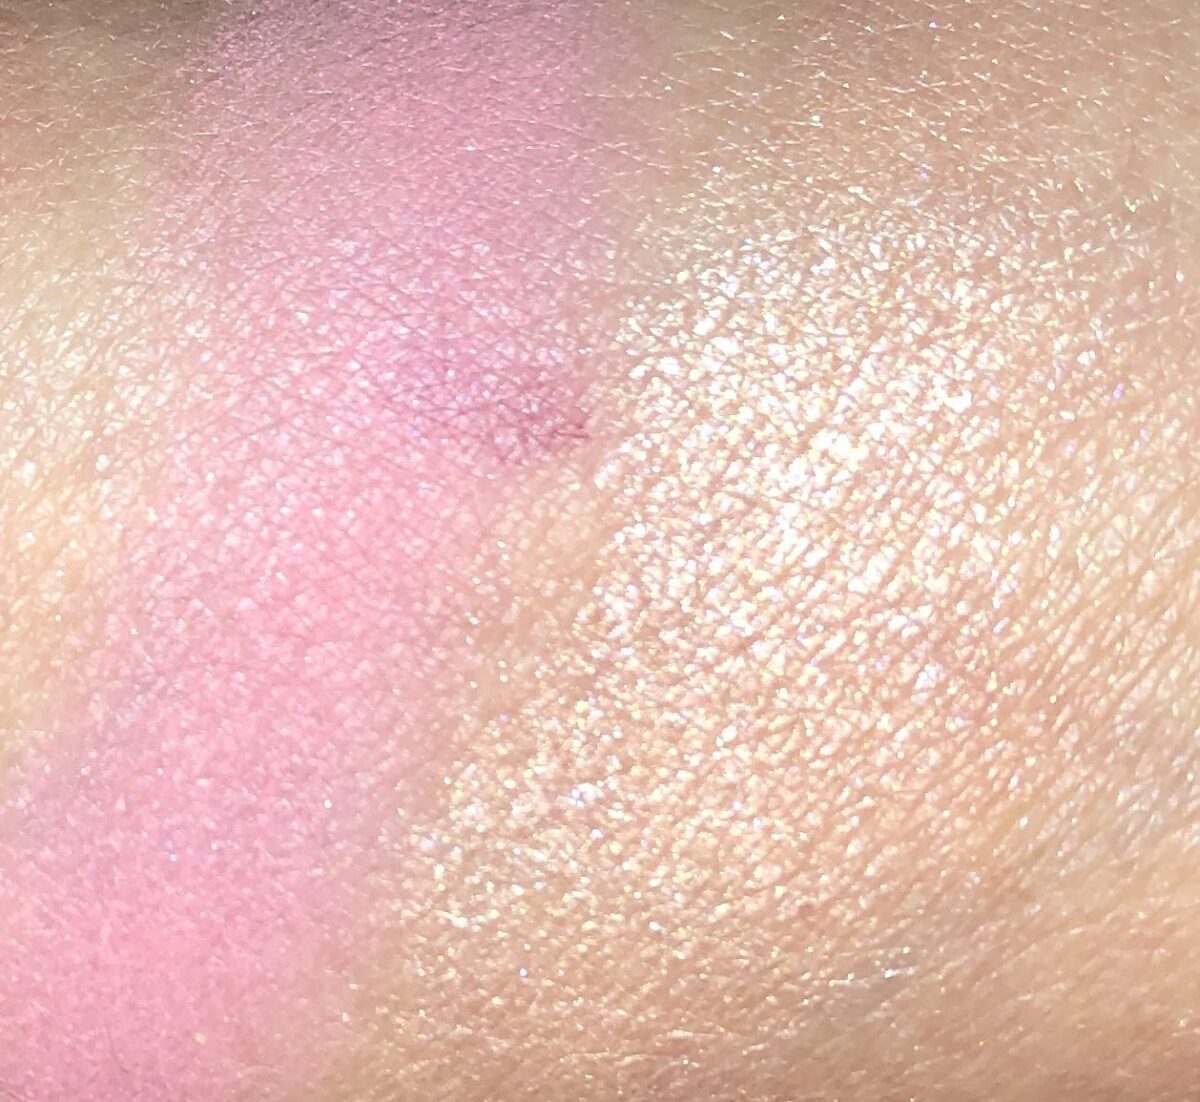 SWATCHES OF THE ROSE WHALE SHARK PALETTE